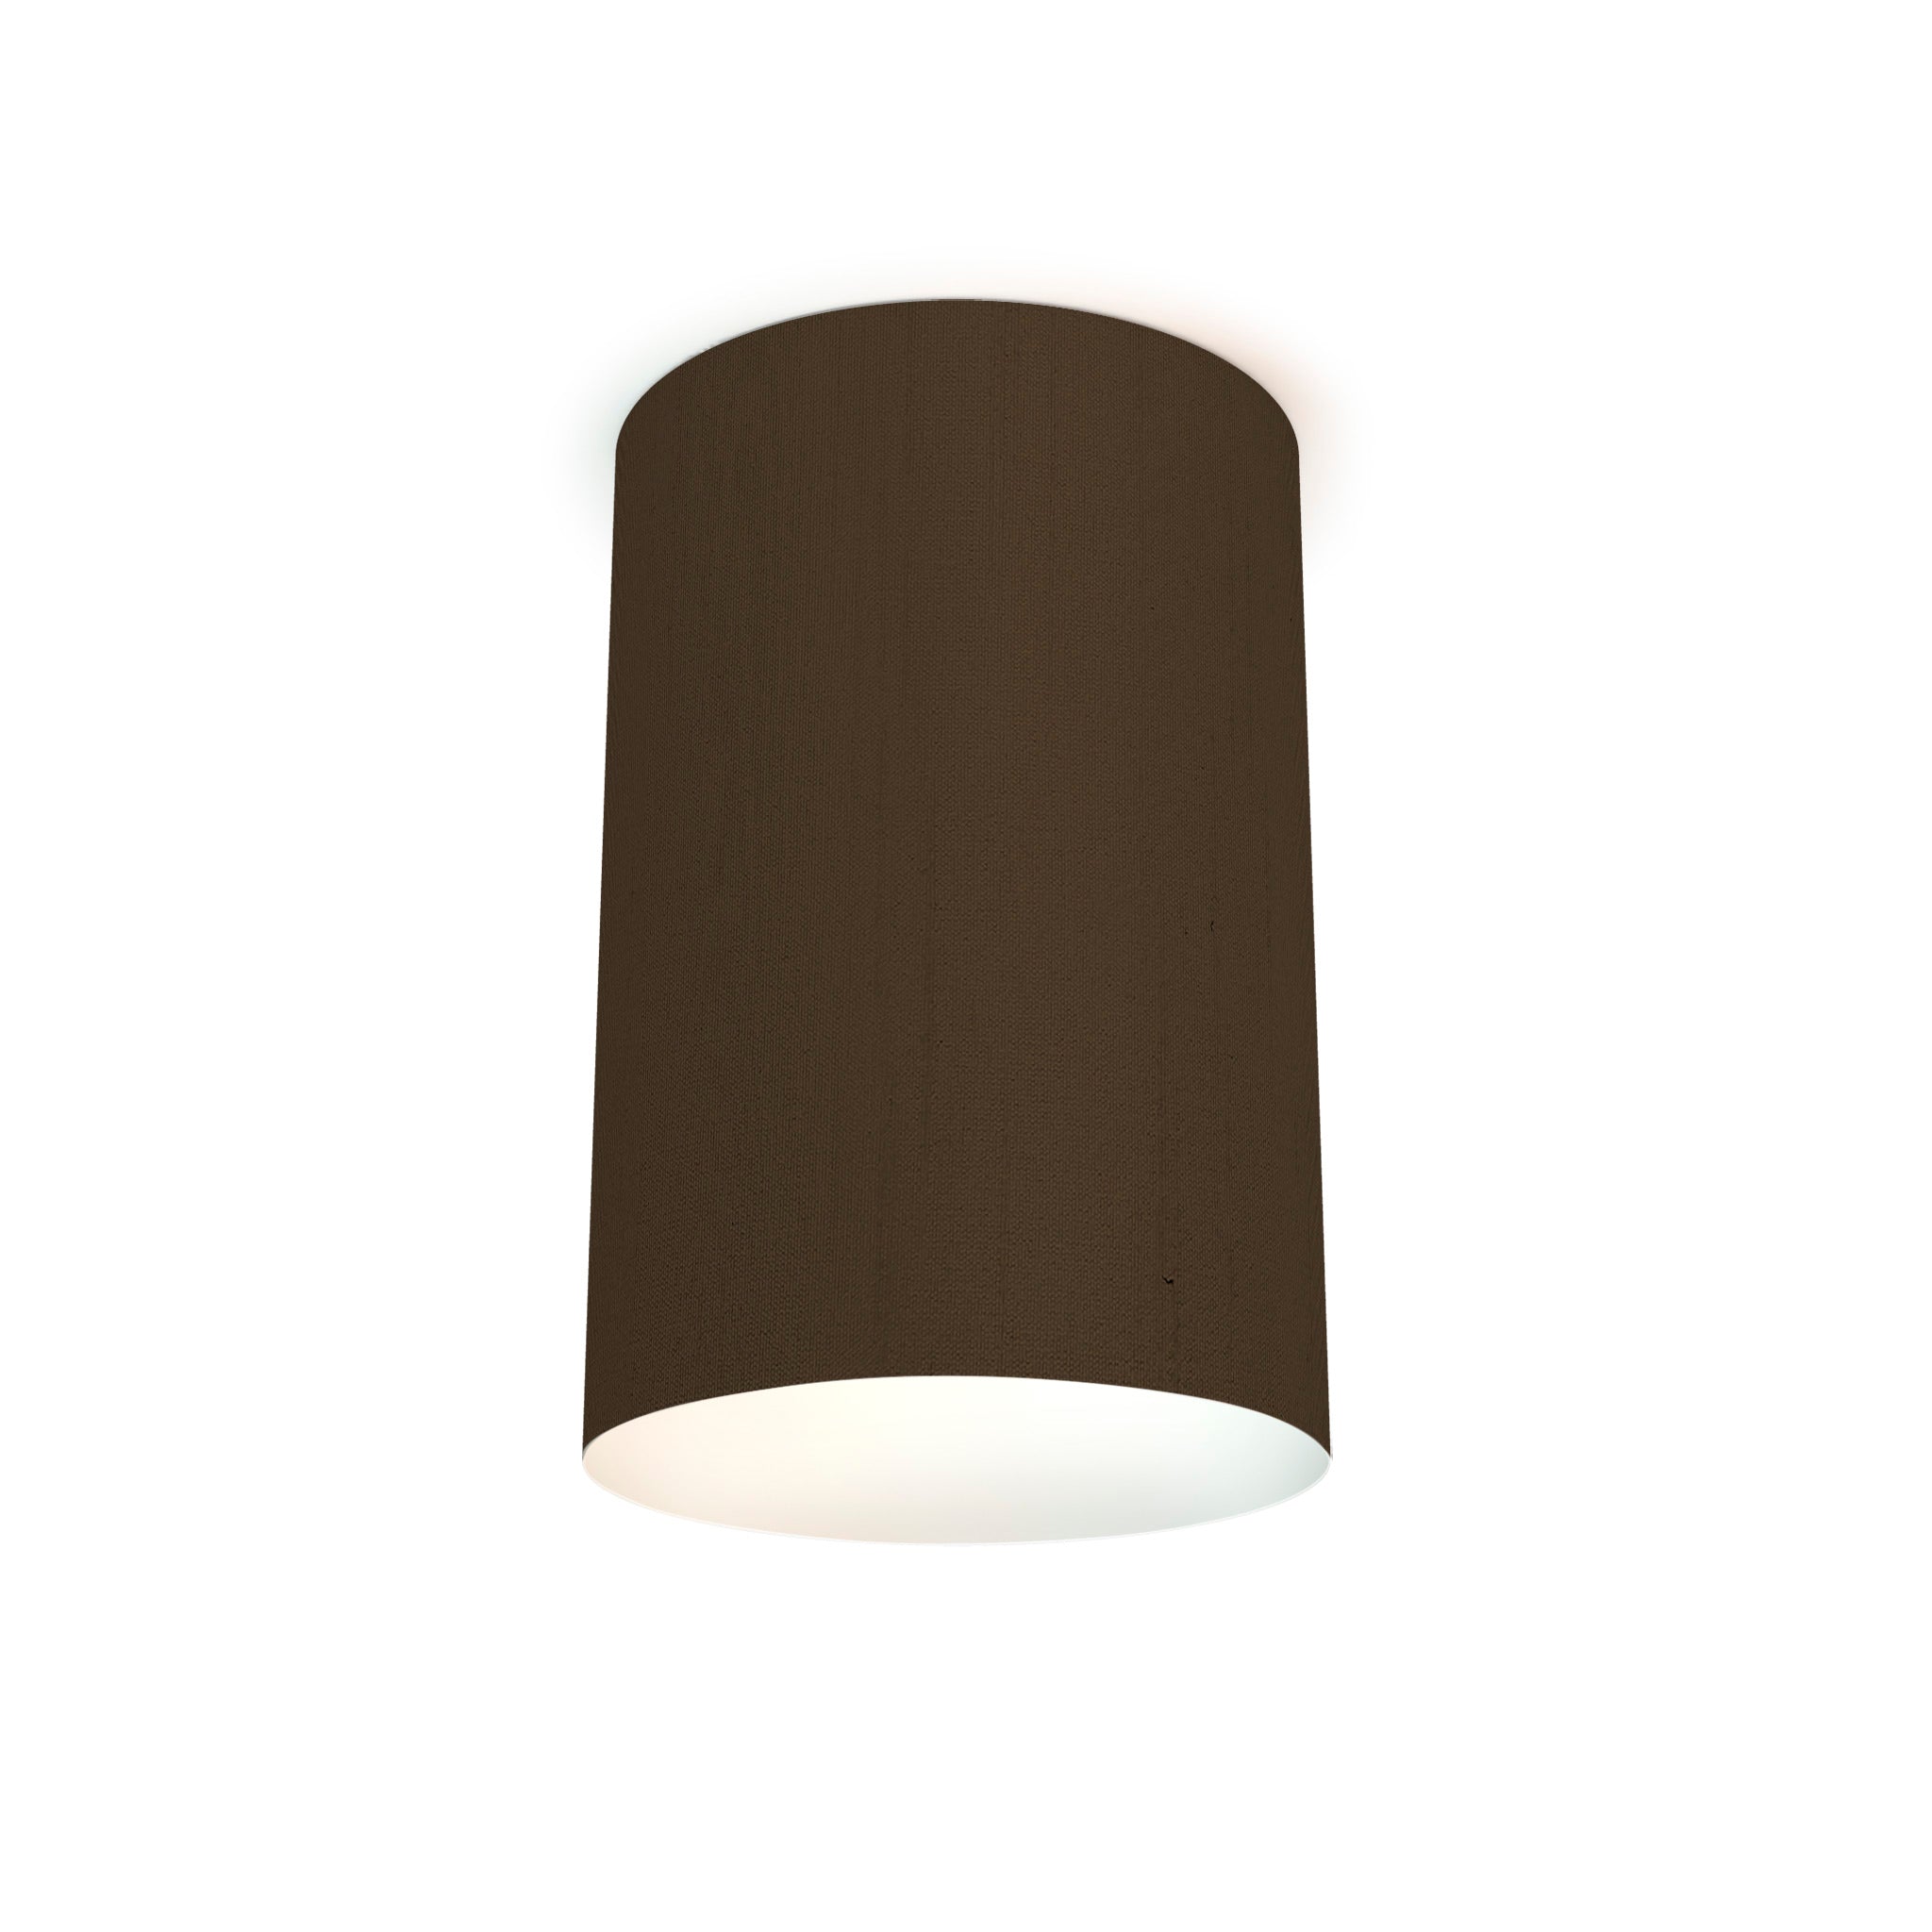 The Lily Flush Mount from Seascape Fixtures in silk, chocolate color.